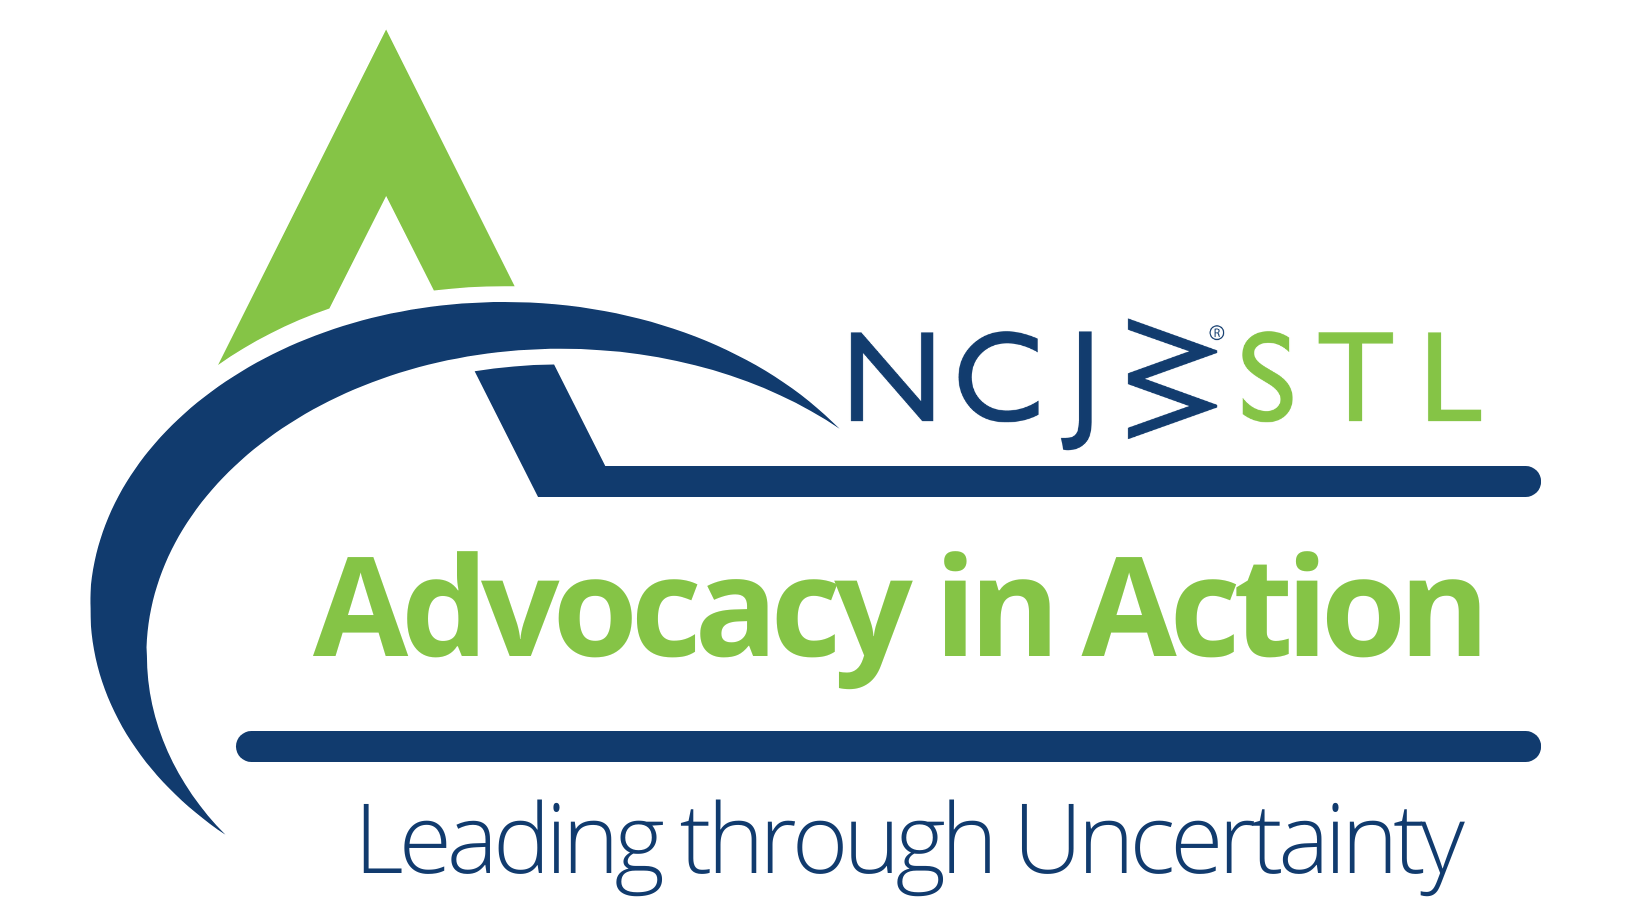 conference logo with text: NCJWSTL Advocacy in Action - Leading through Uncertainty